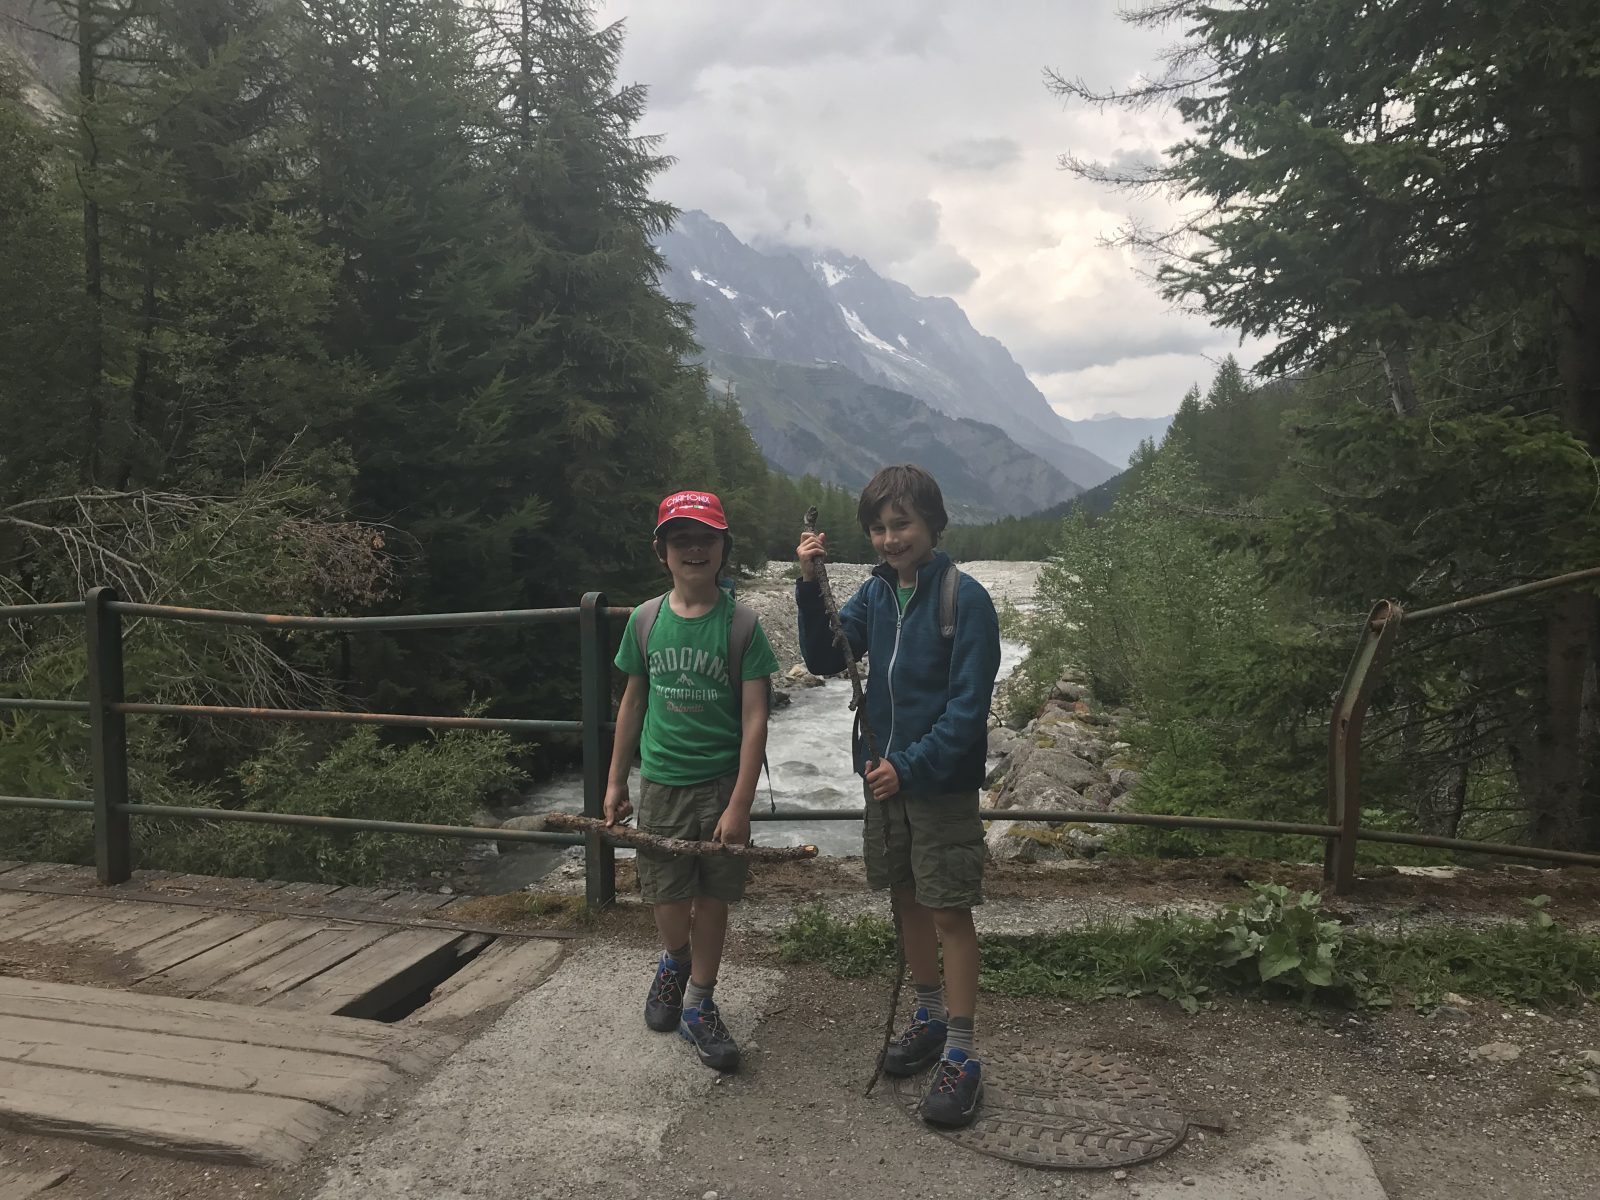 Walking by the Dora Baltea river in Val Veny. Photo: The-Ski-Guru. Our summer in the mountains – one week in Courmayeur.